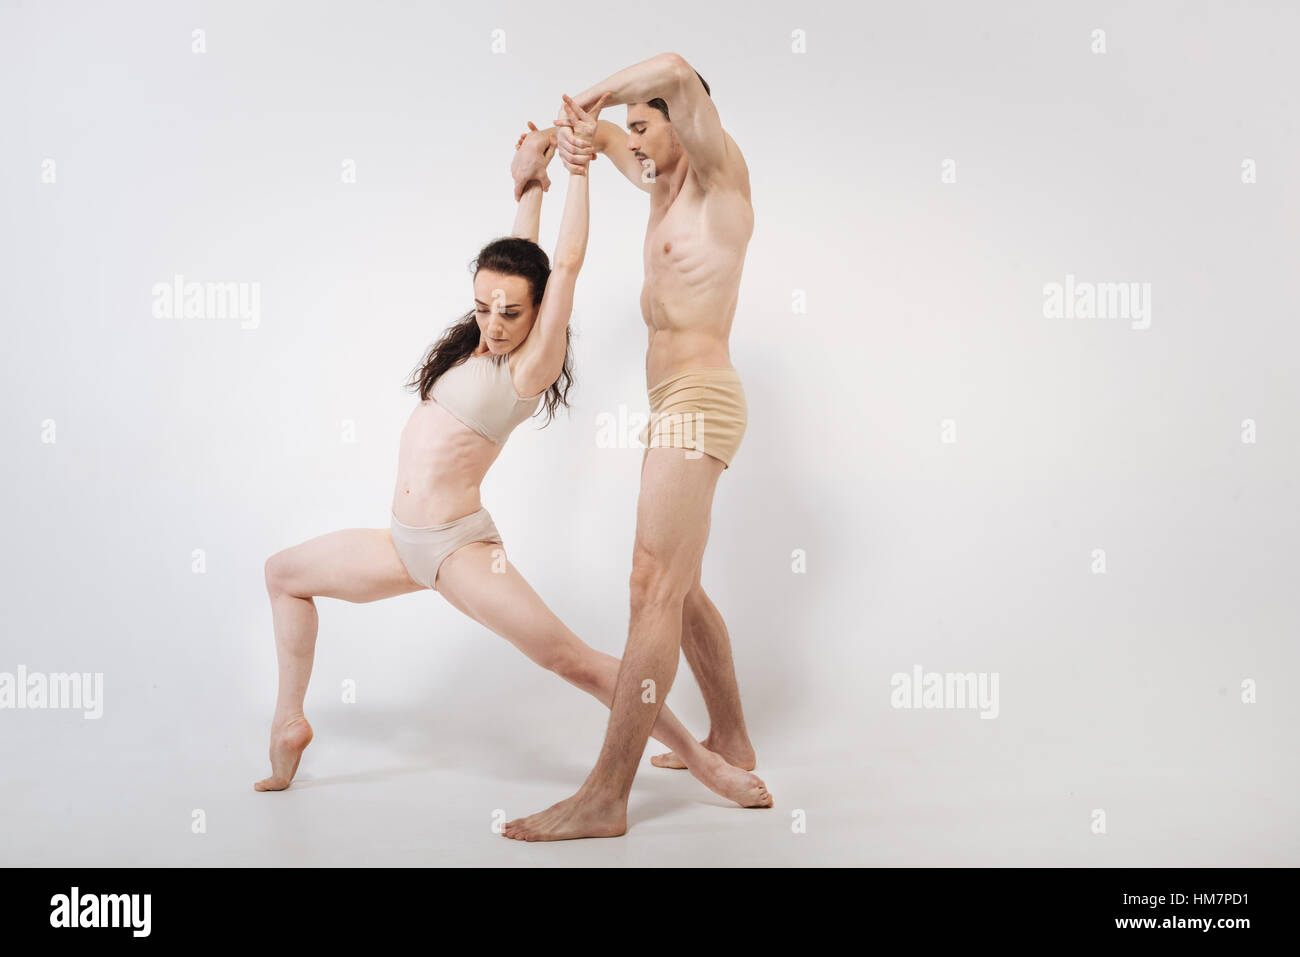 Artistic young gymnasts stretching in the studio Stock Photo